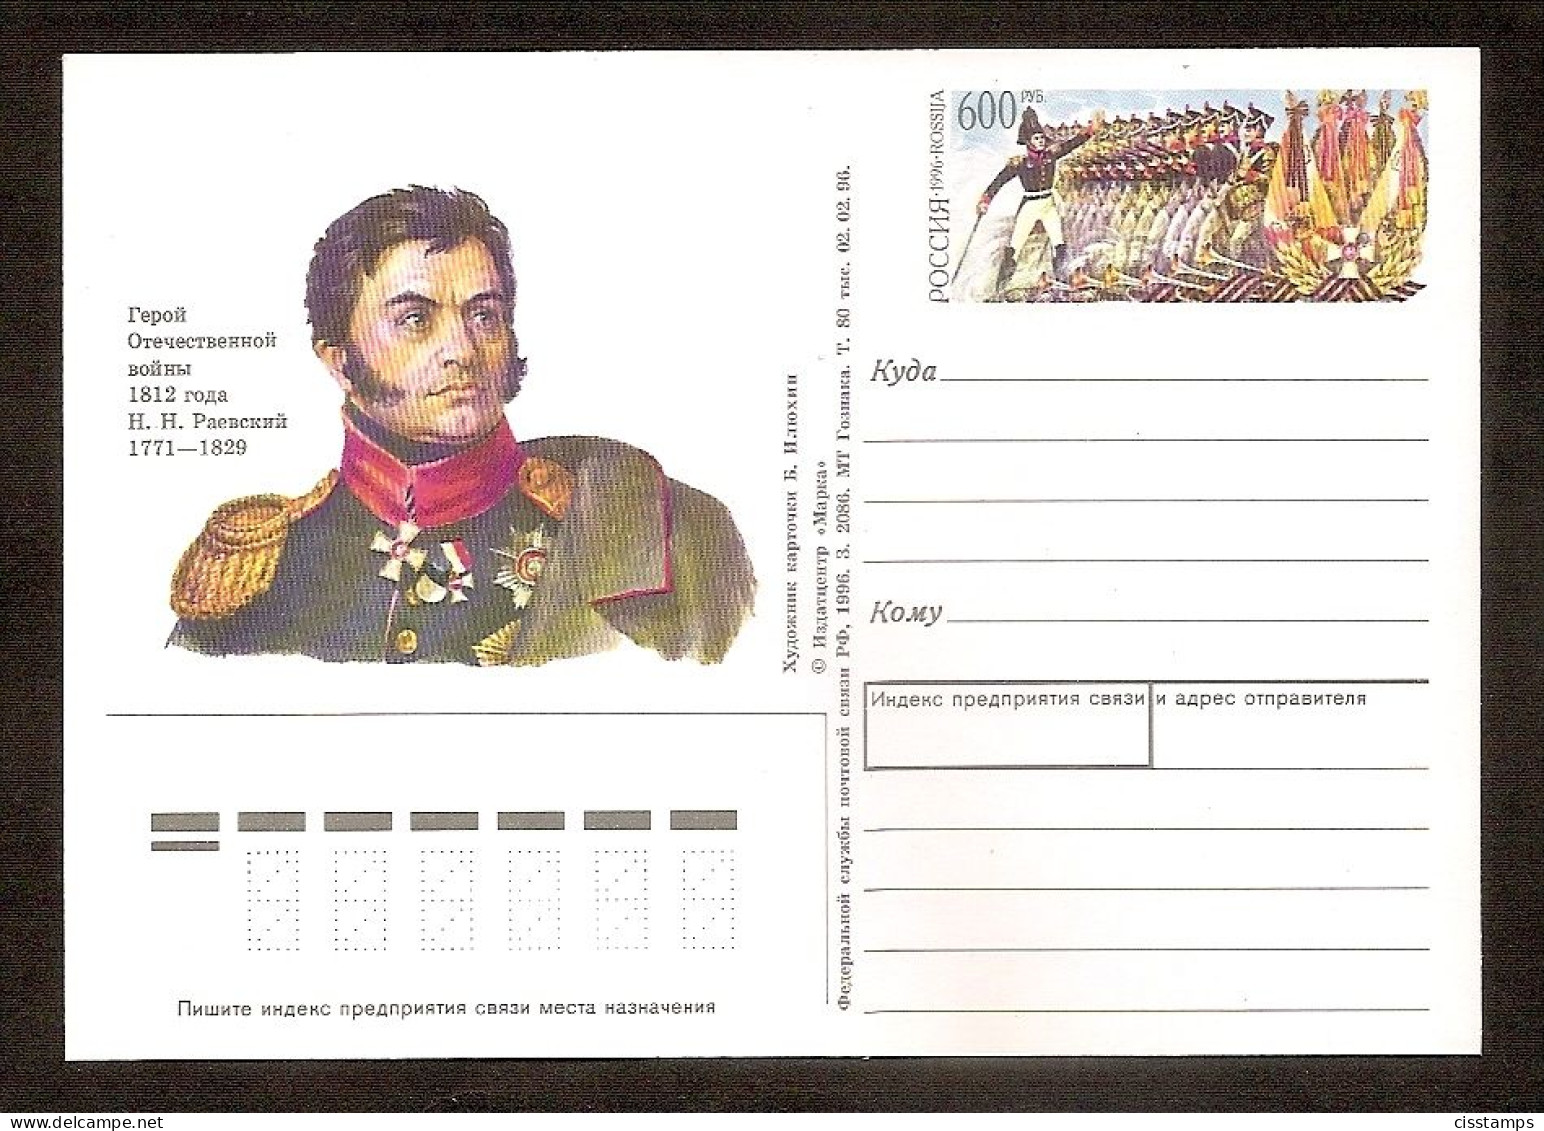 Russia 1996●Hero Of The 1812 War N.Raevsky●Symbols Of Russia●stamped Stationery●postal Card●Mi PSo49 - Stamped Stationery